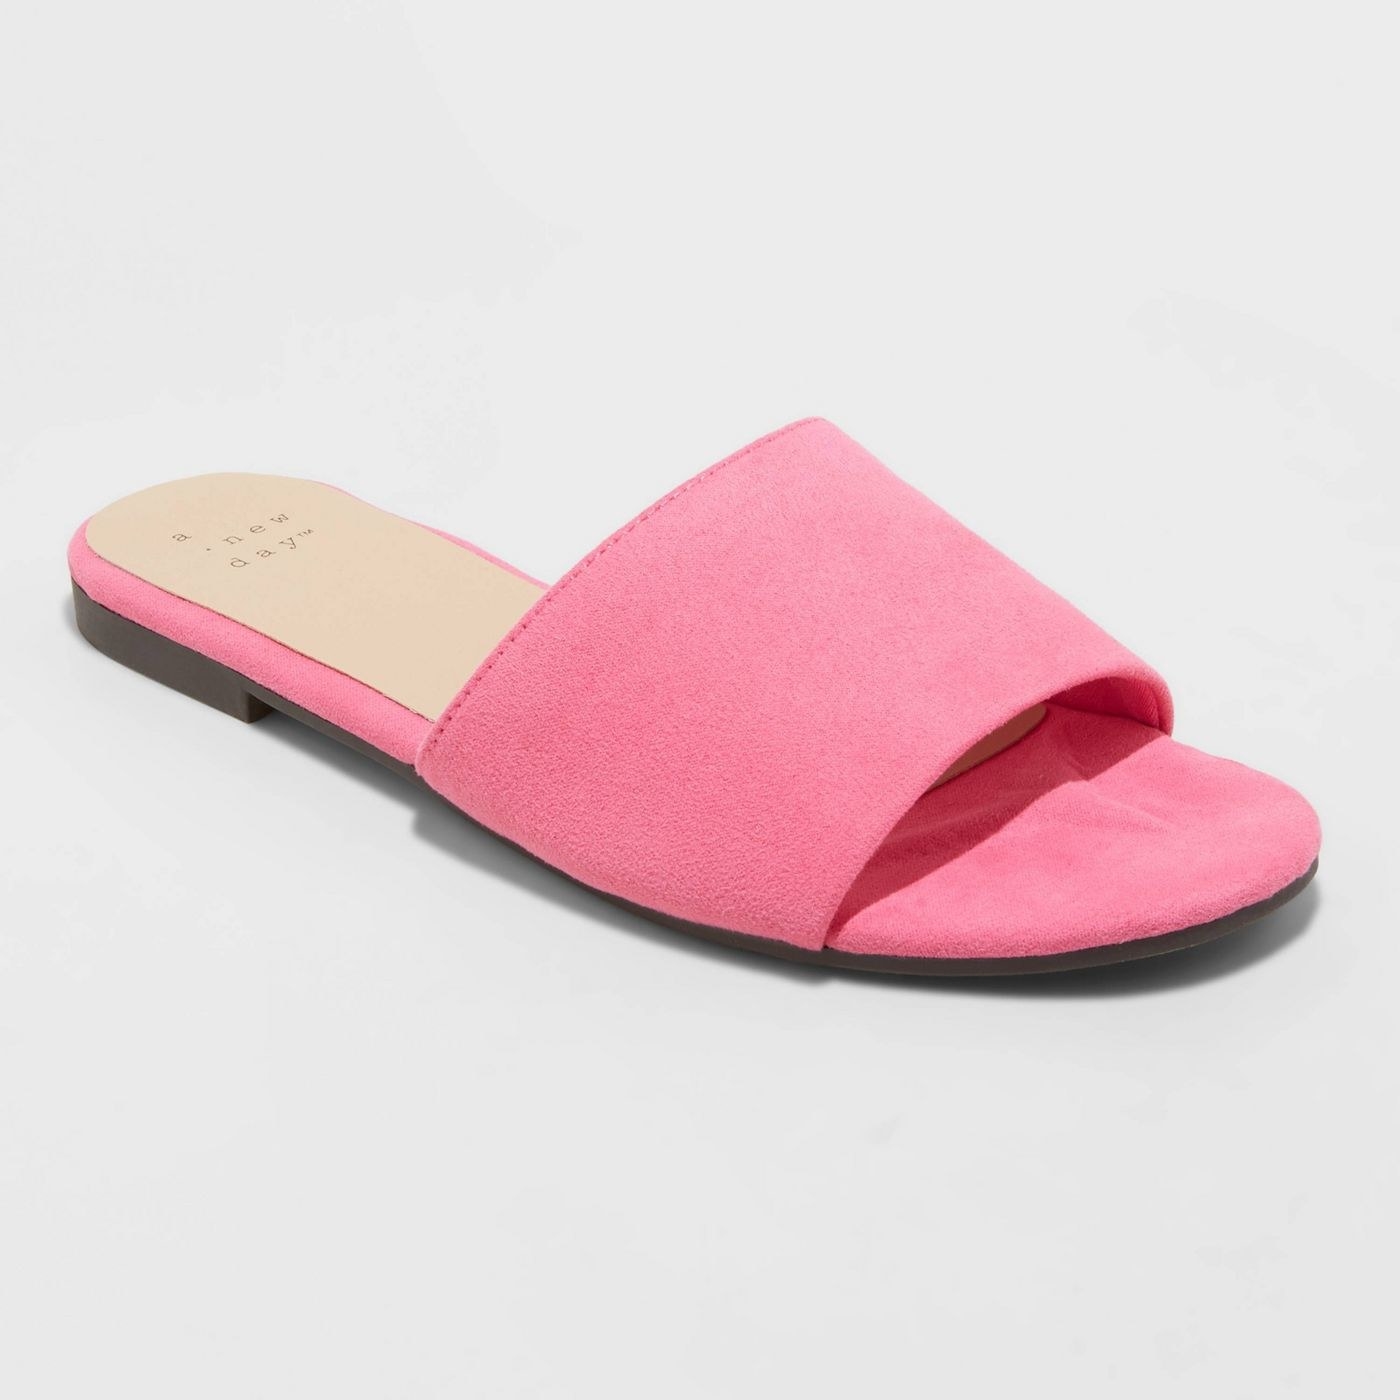 The pink pair of slide sandals